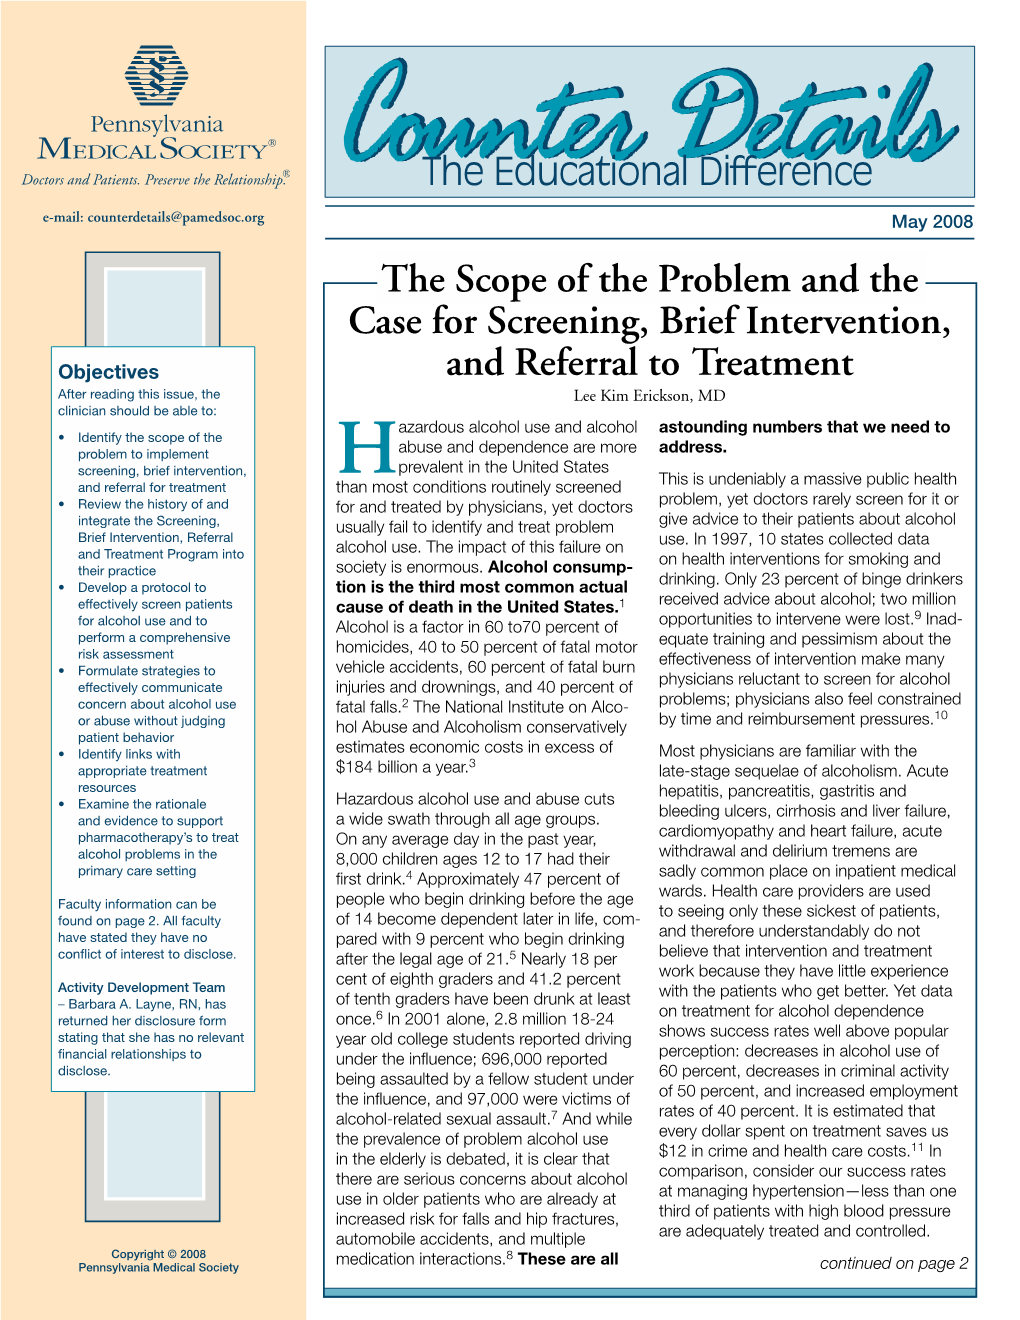 The Scope of the Problem and the Case for Screening, Brief Intervention, and Referral to Treatment